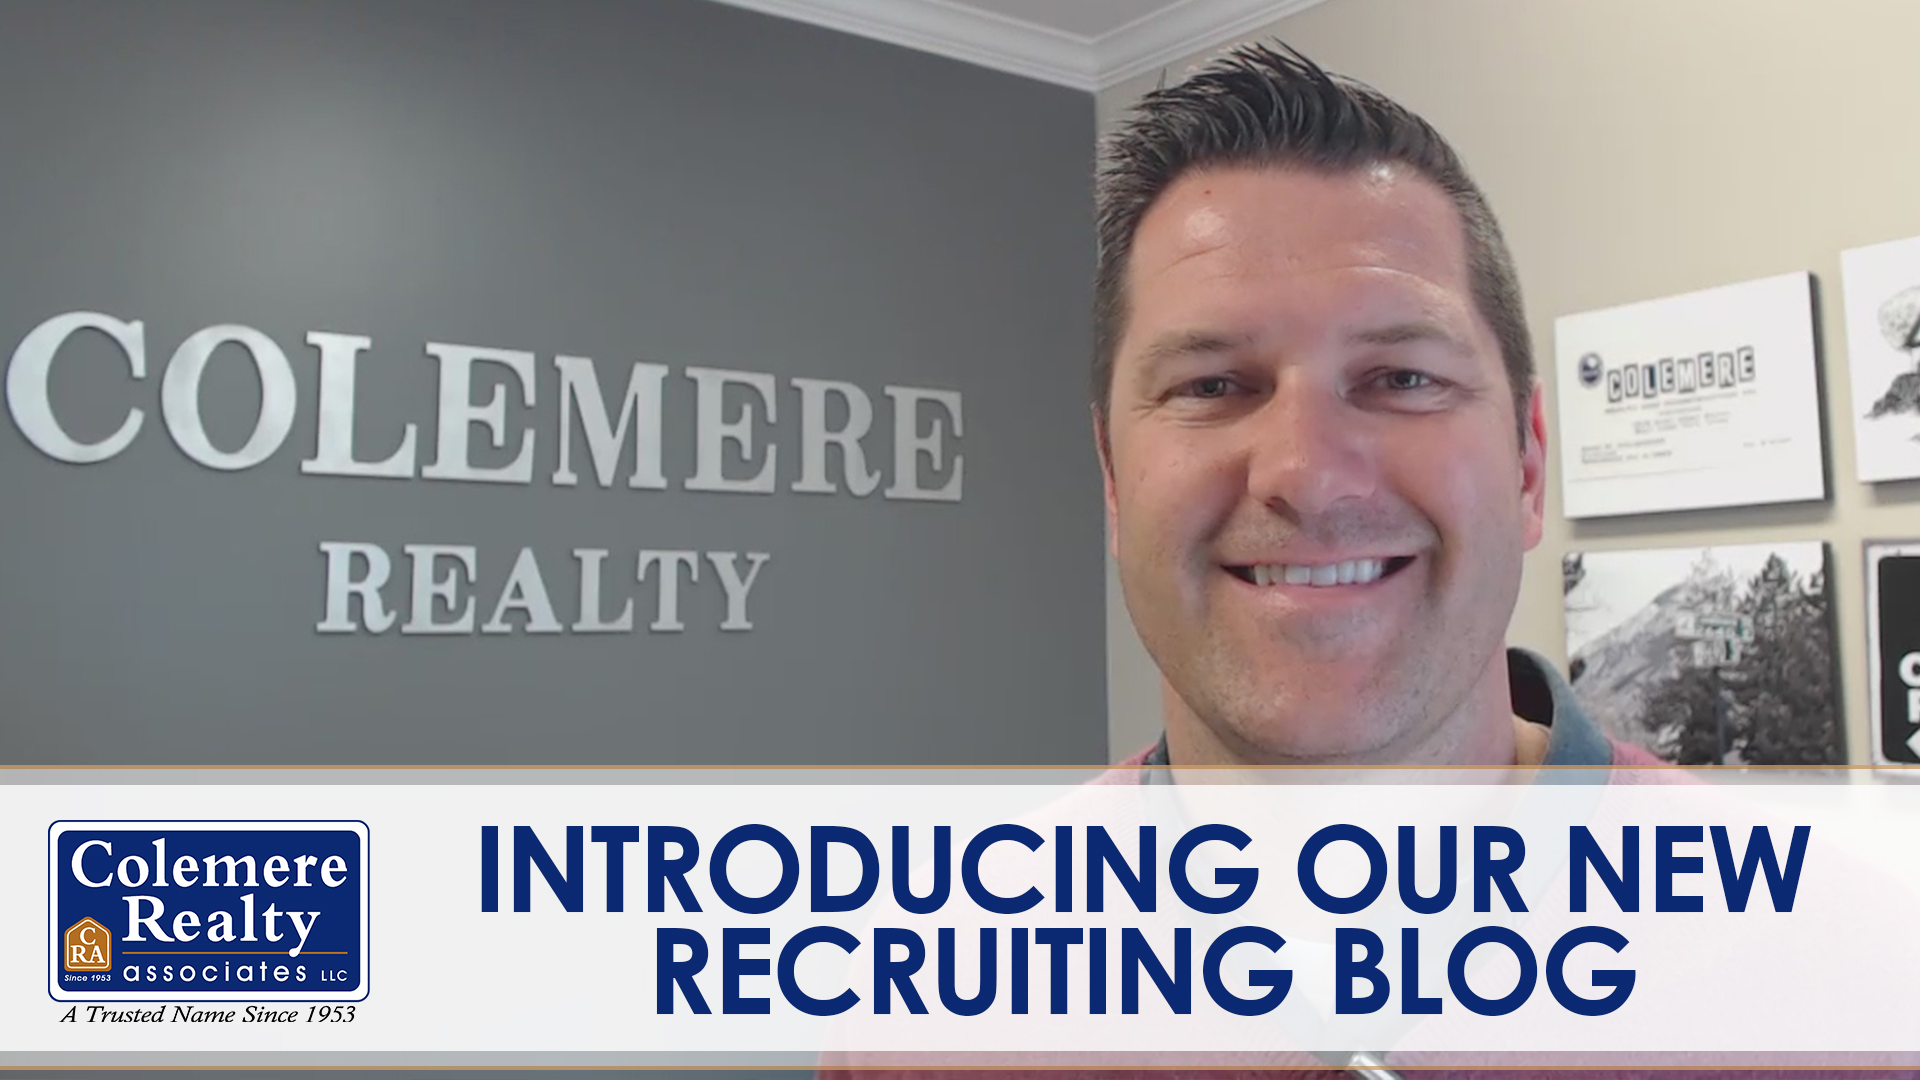 What Will Agents Learn From Our New Recruiting Blog?